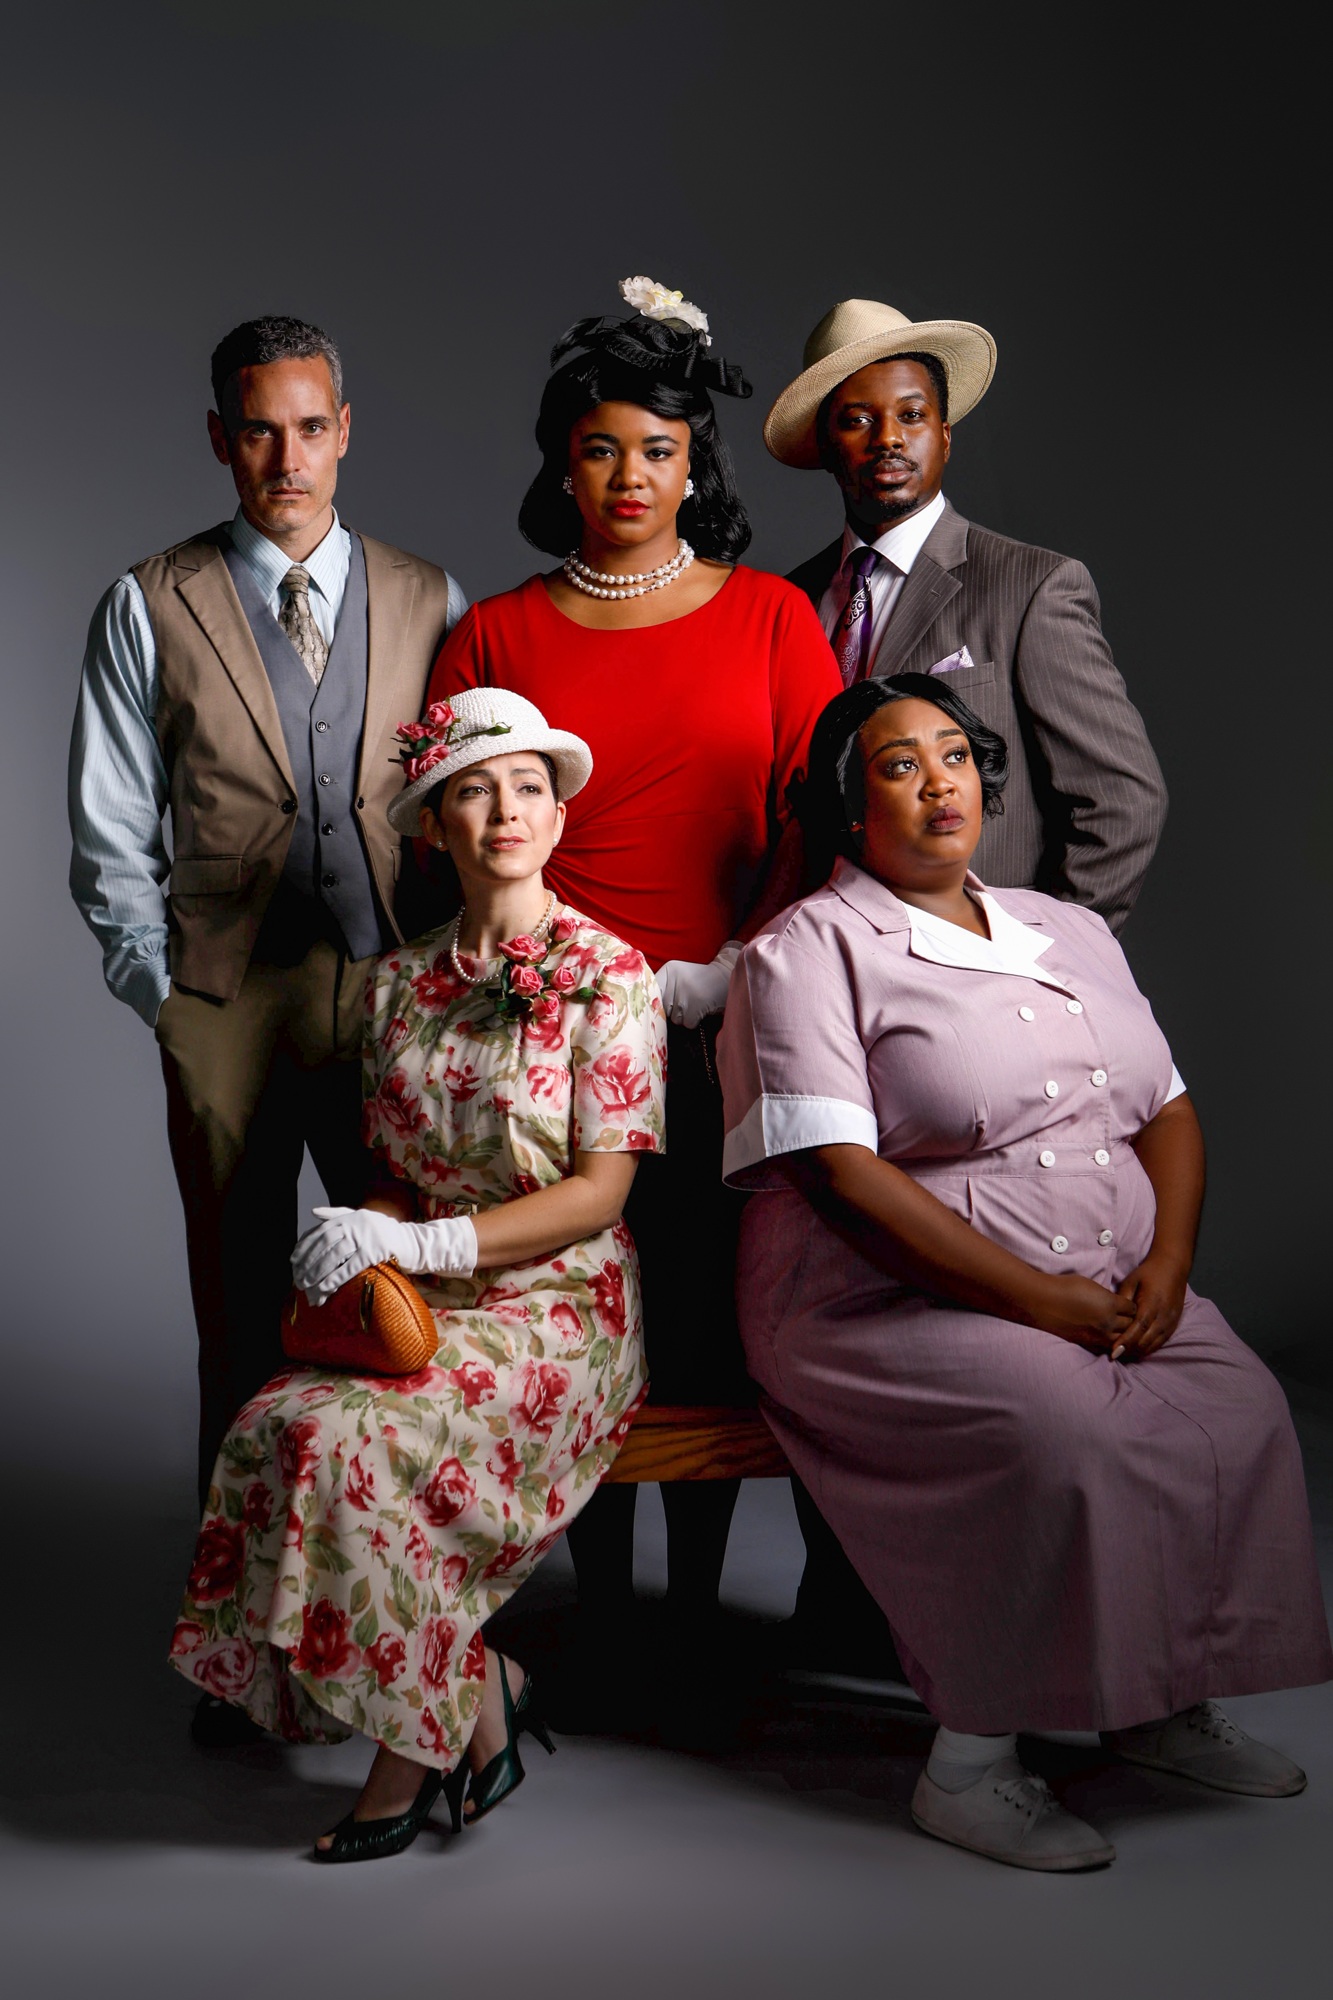 The cast of Ruby, standing from left: Casey Murphy, Aleah Vassell, Brian L. Boyd. Seated: Eliza Engle, Ariel Blue. (Photo: Sorcha Augustine)